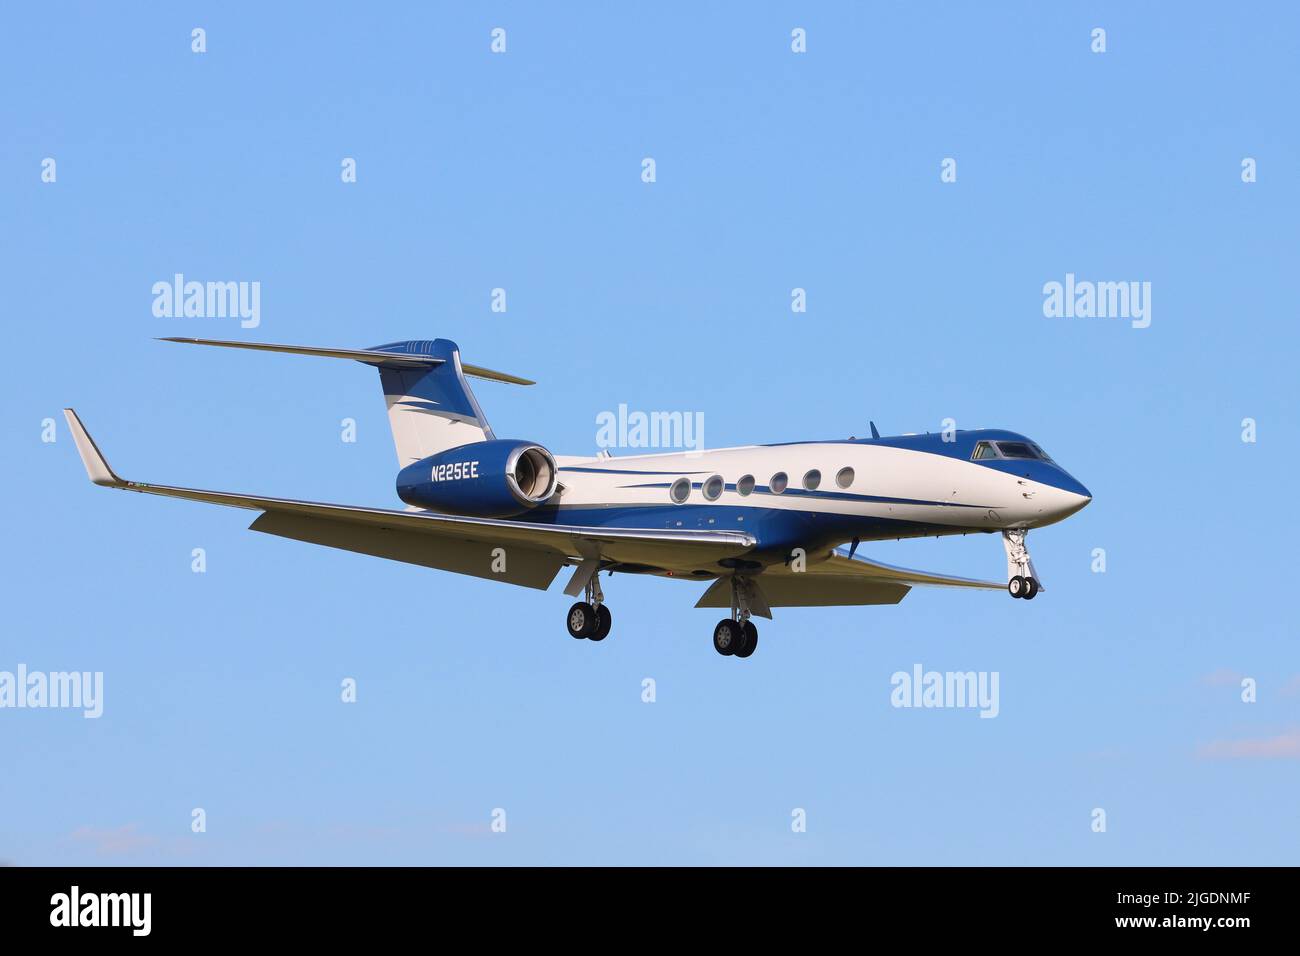 Gulfstream Aerospace G-V, N225EE, landing at Stansted Airport, Essex, UK Stock Photo